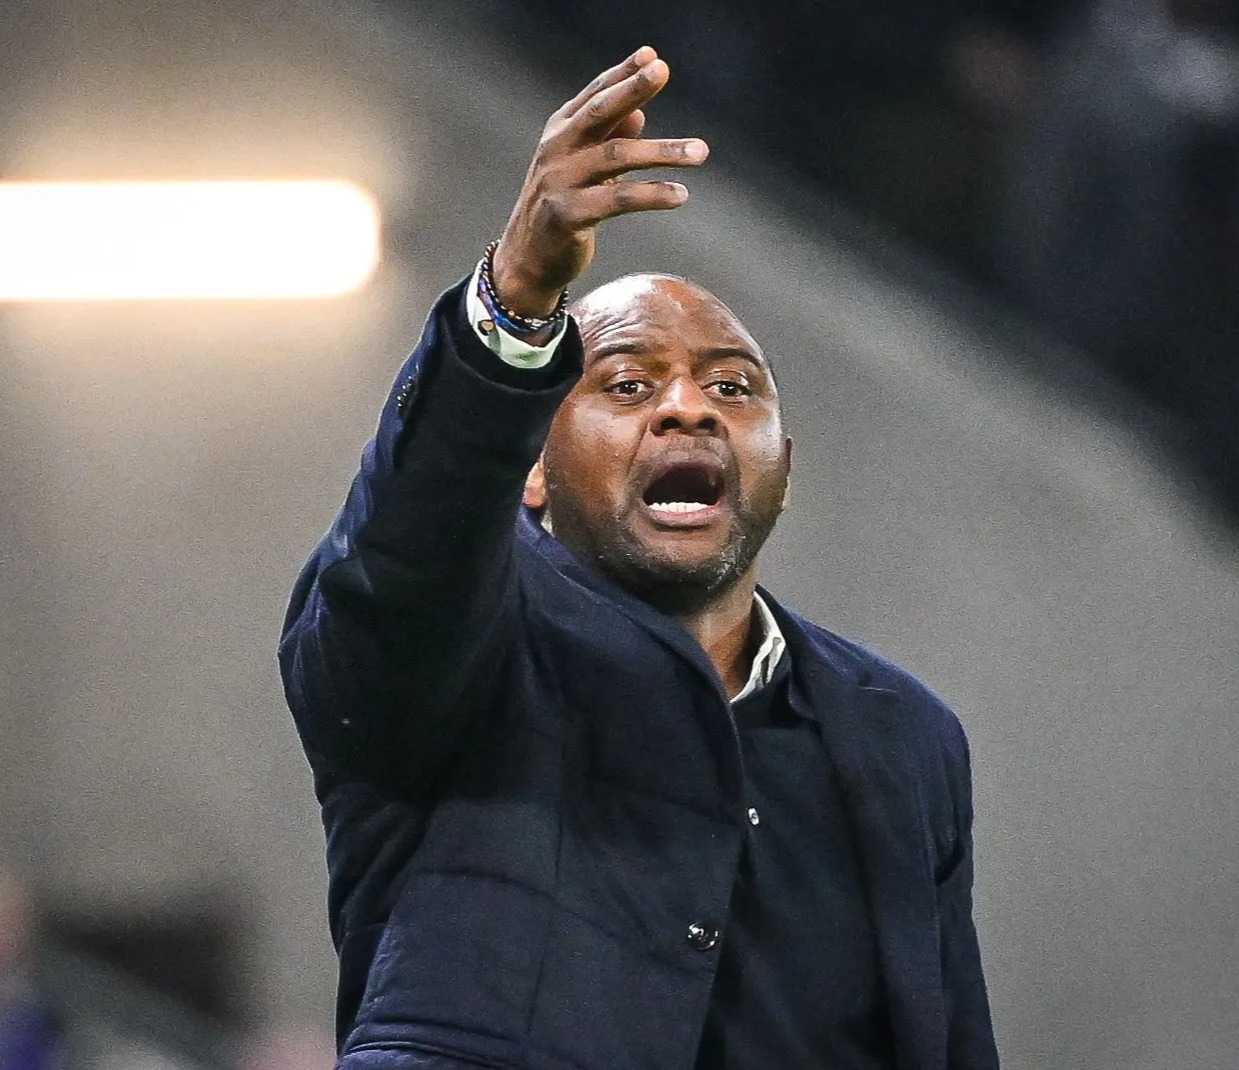 Strasbourg manager Patrick Vieira has argued the club will reap long-term benefits from links with Chelsea